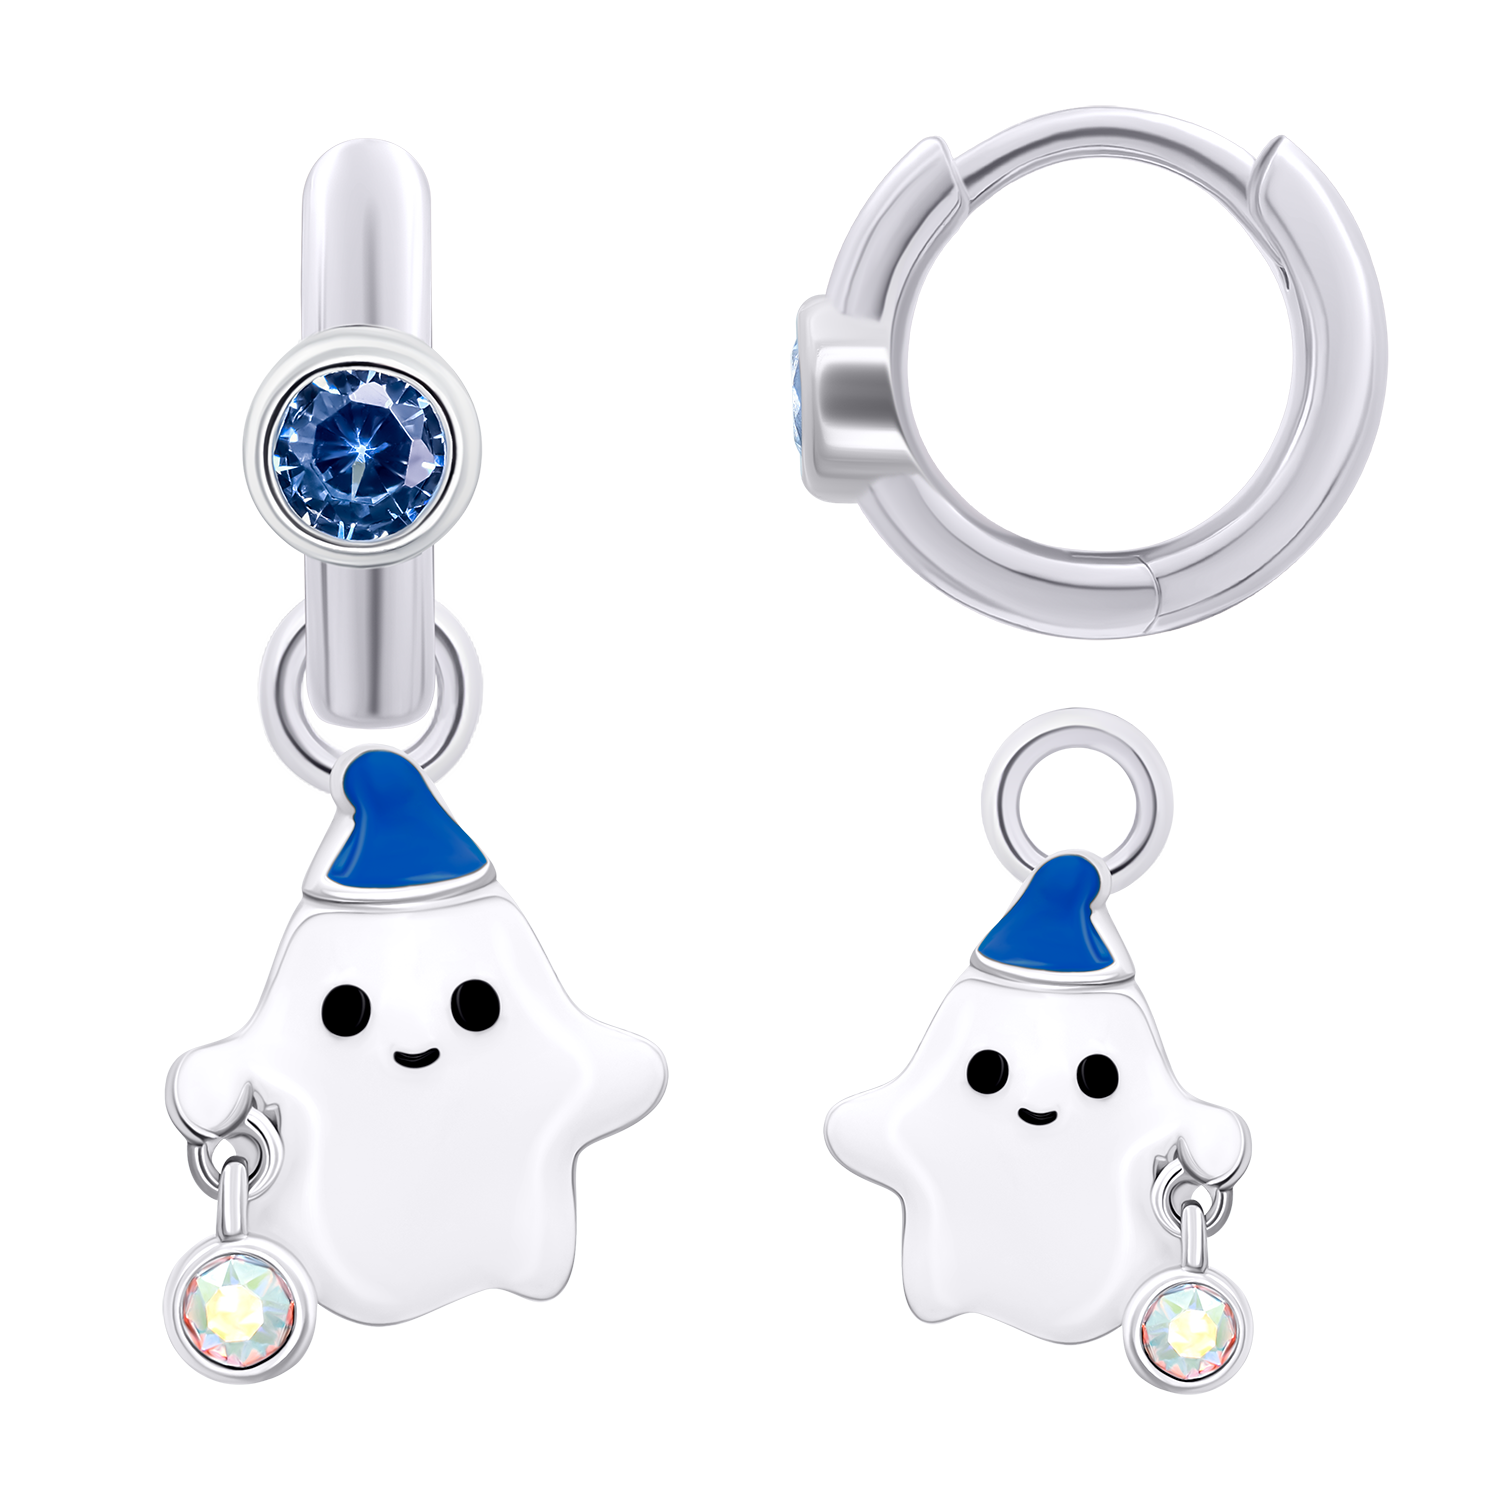 Earrings with pendants BOO the ghost